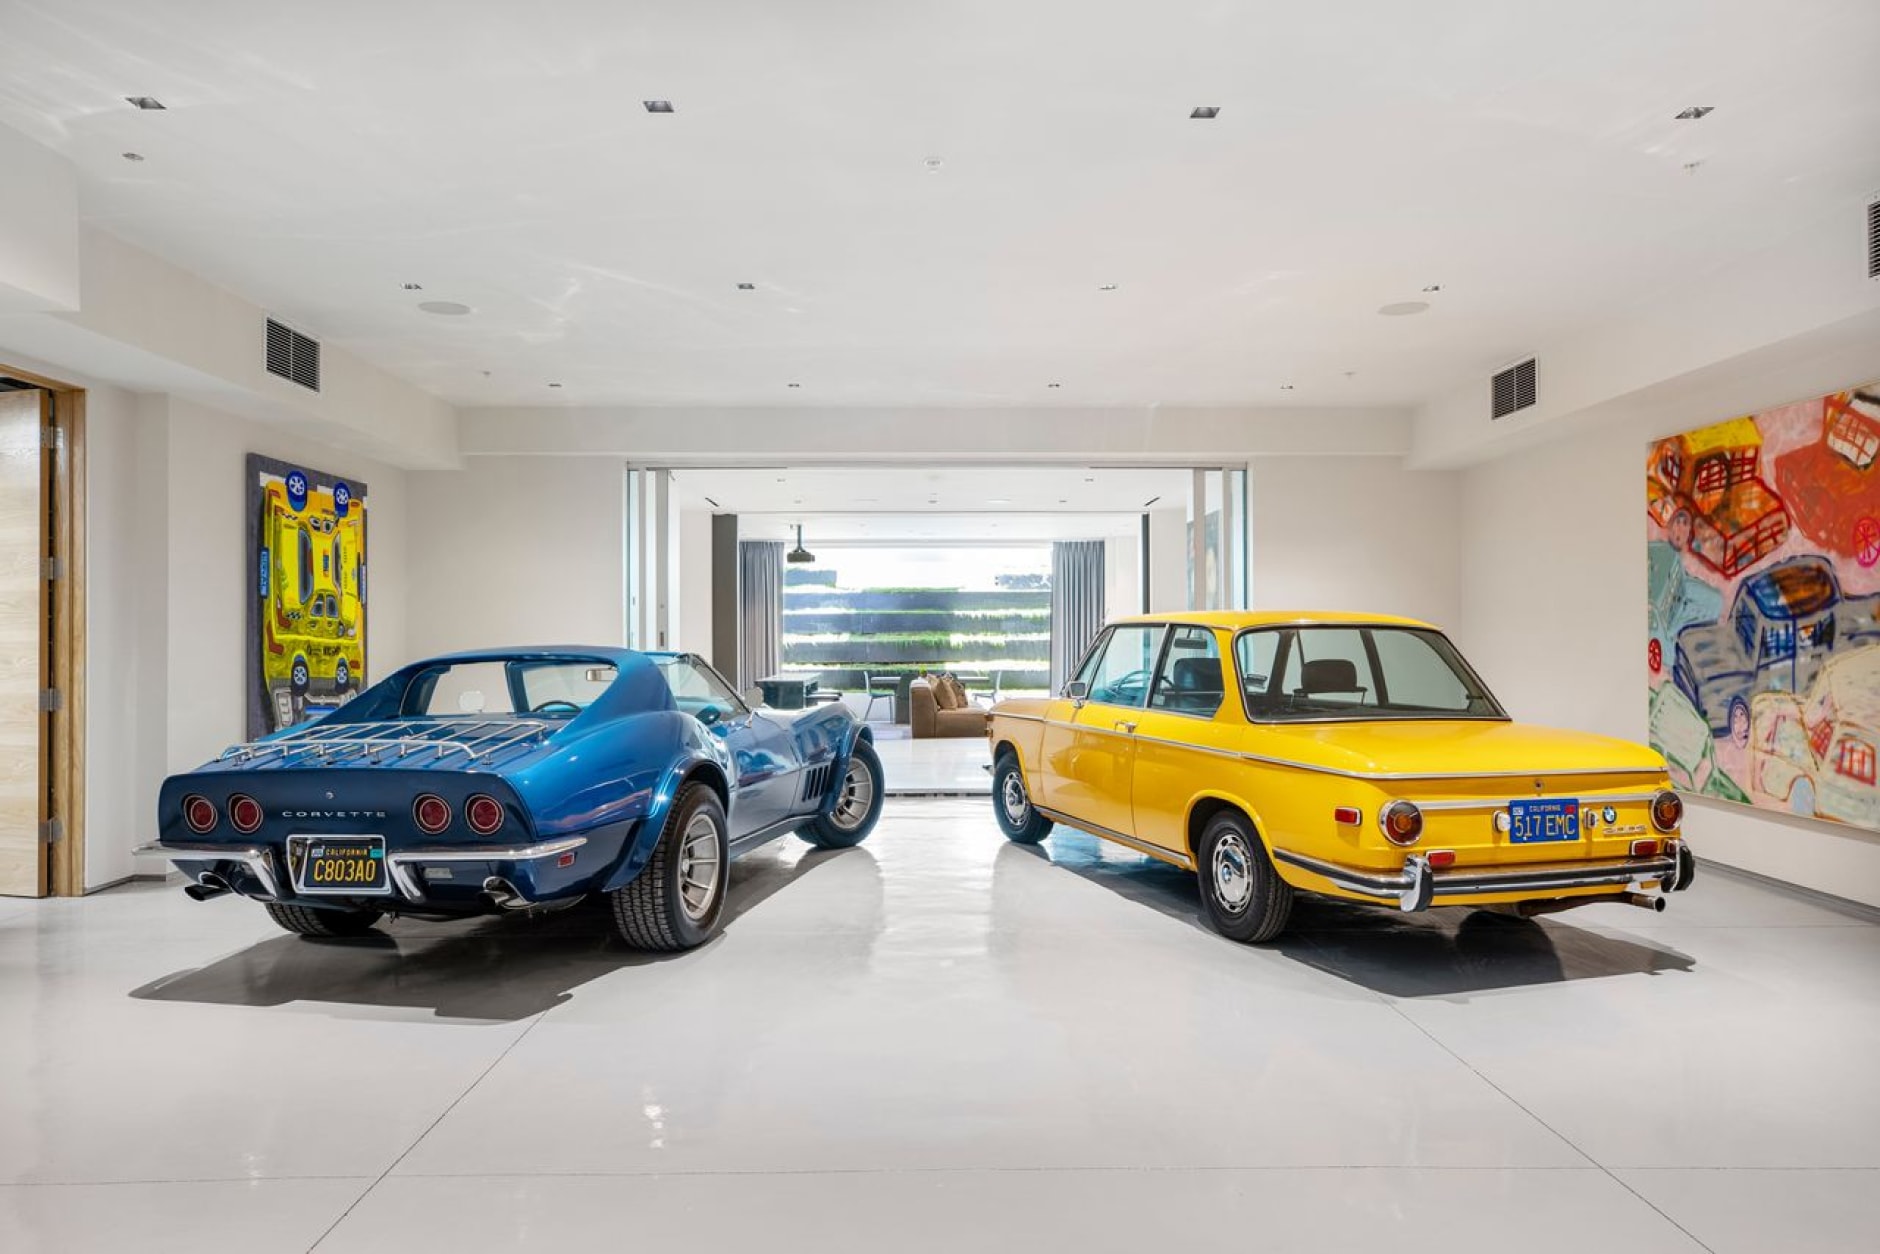 Impeccably restored vintage cars, one in vibrant yellow and the other in striking blue, command attention in a spacious white room, surrounded by vibrant paintings that echo the automotive theme.